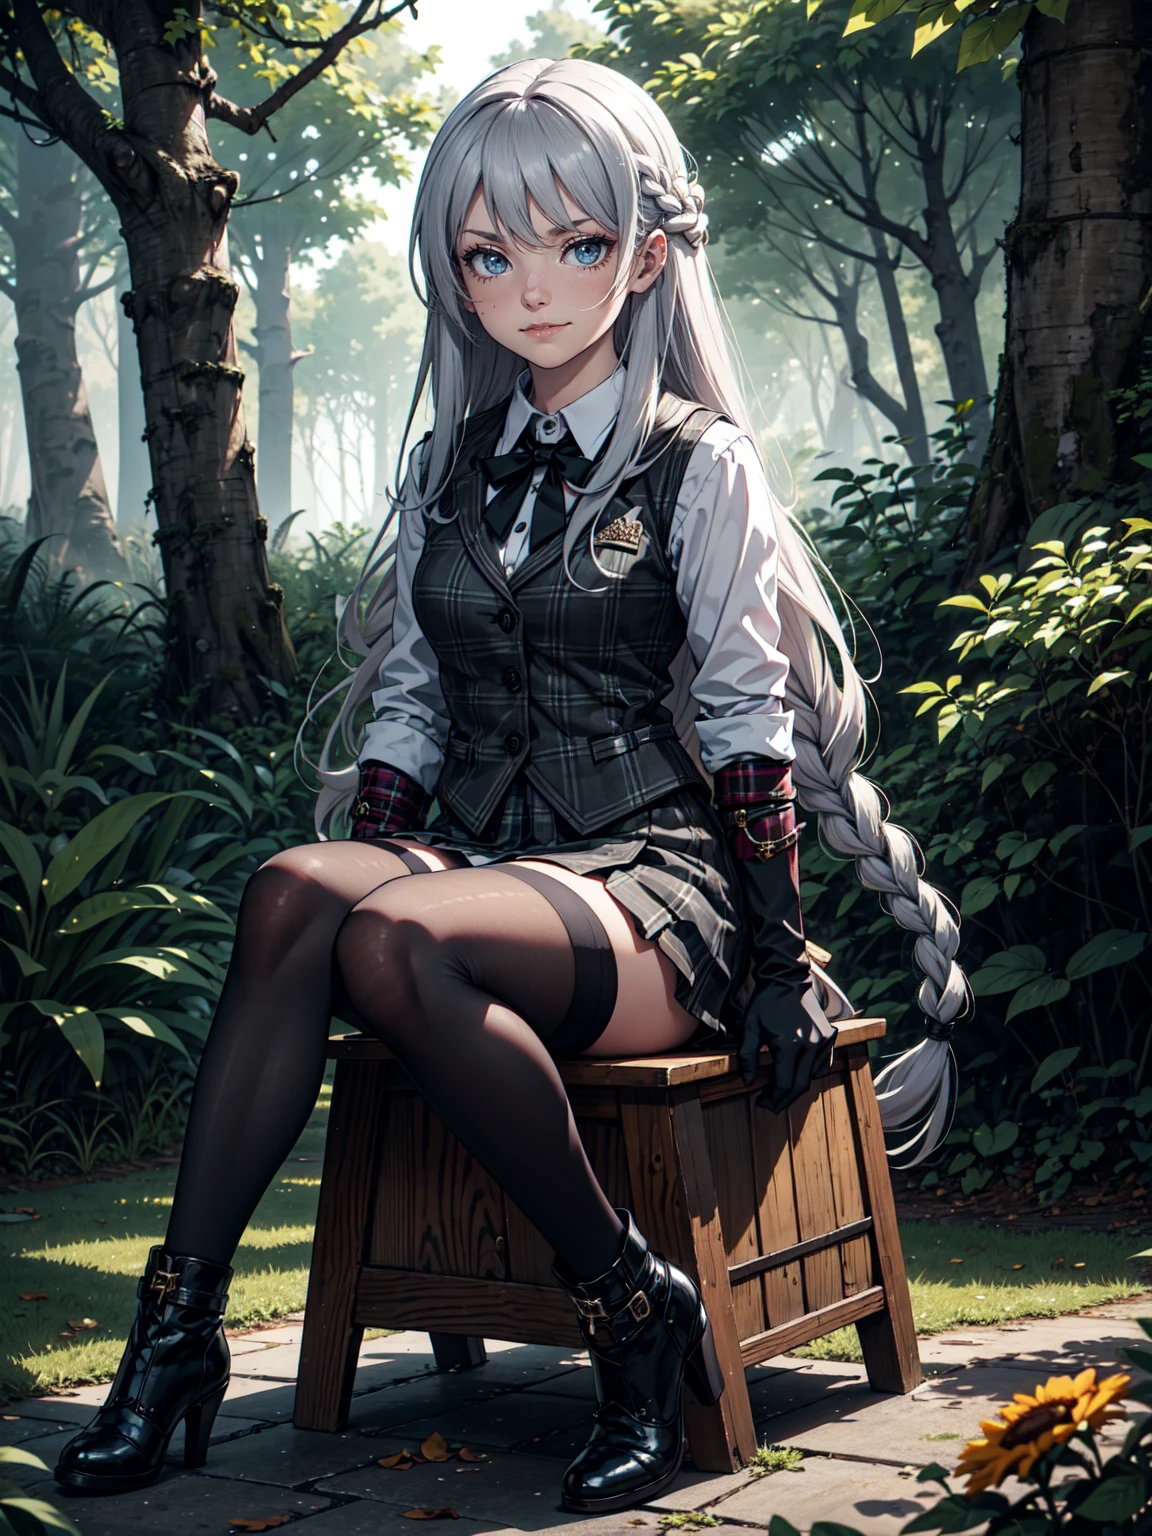 Ultra High Definition, Ultra High Quality, Hyper Definition, Hyper Quality, Hyper Detailed, Extremely Detailed, Perfectly Detailed, 8k, 1 Anime Female, Long Silver Hair with Small Braids,  Black Luxury Vest, Grey Plaid Skirt, Dark Boots On Heels, Black Tights, Gloves, Solid Green Eyes, Smirking  Expressio, Sitting, White Flower Barrette, Dressed in school , Forest Panoramic Background
